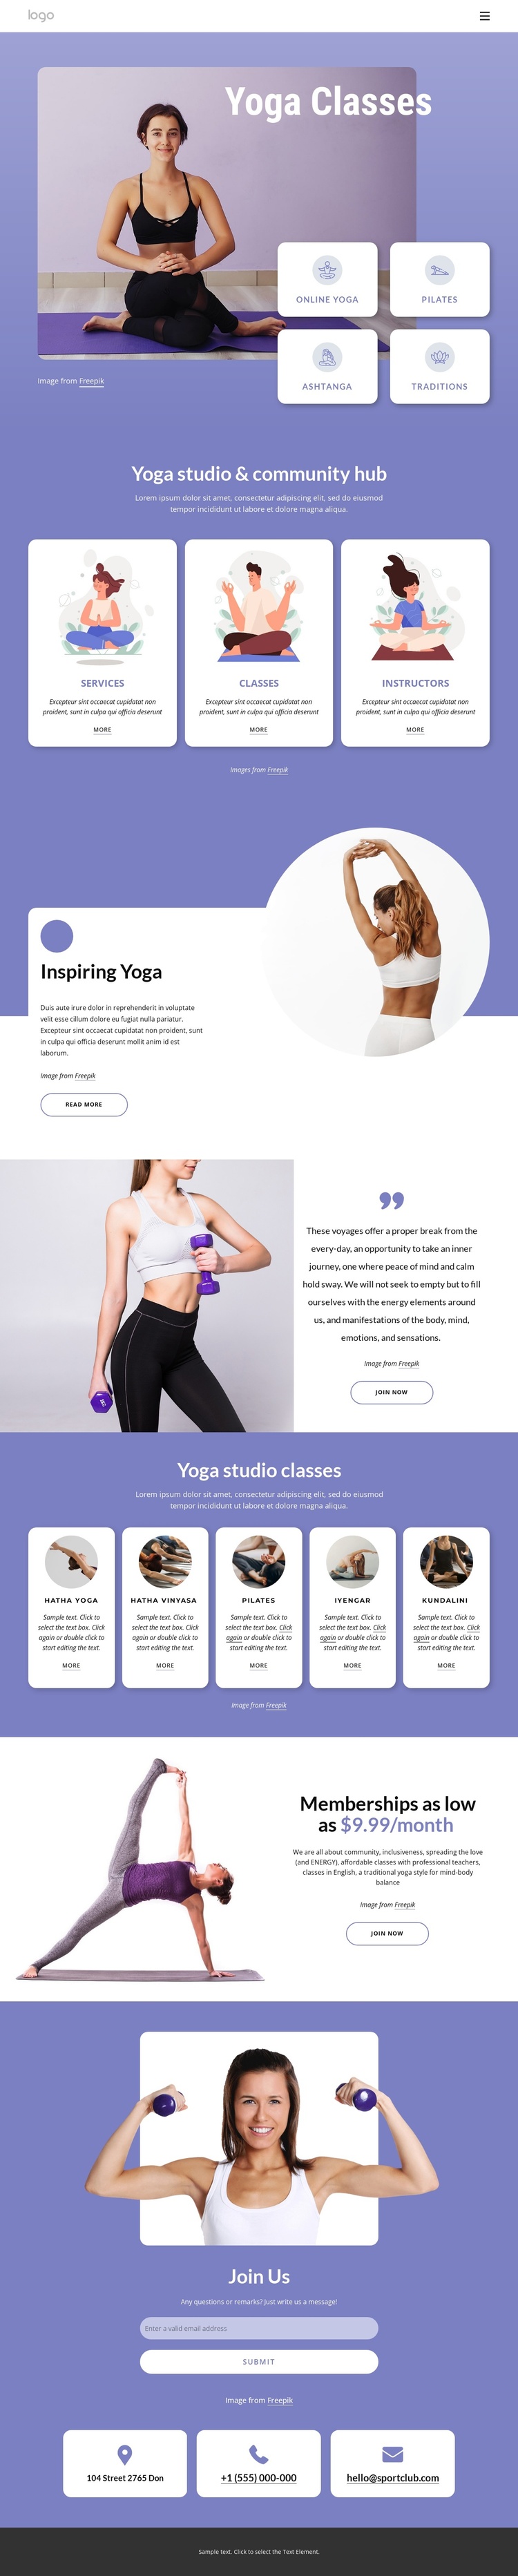 Join our yoga classes Joomla Template